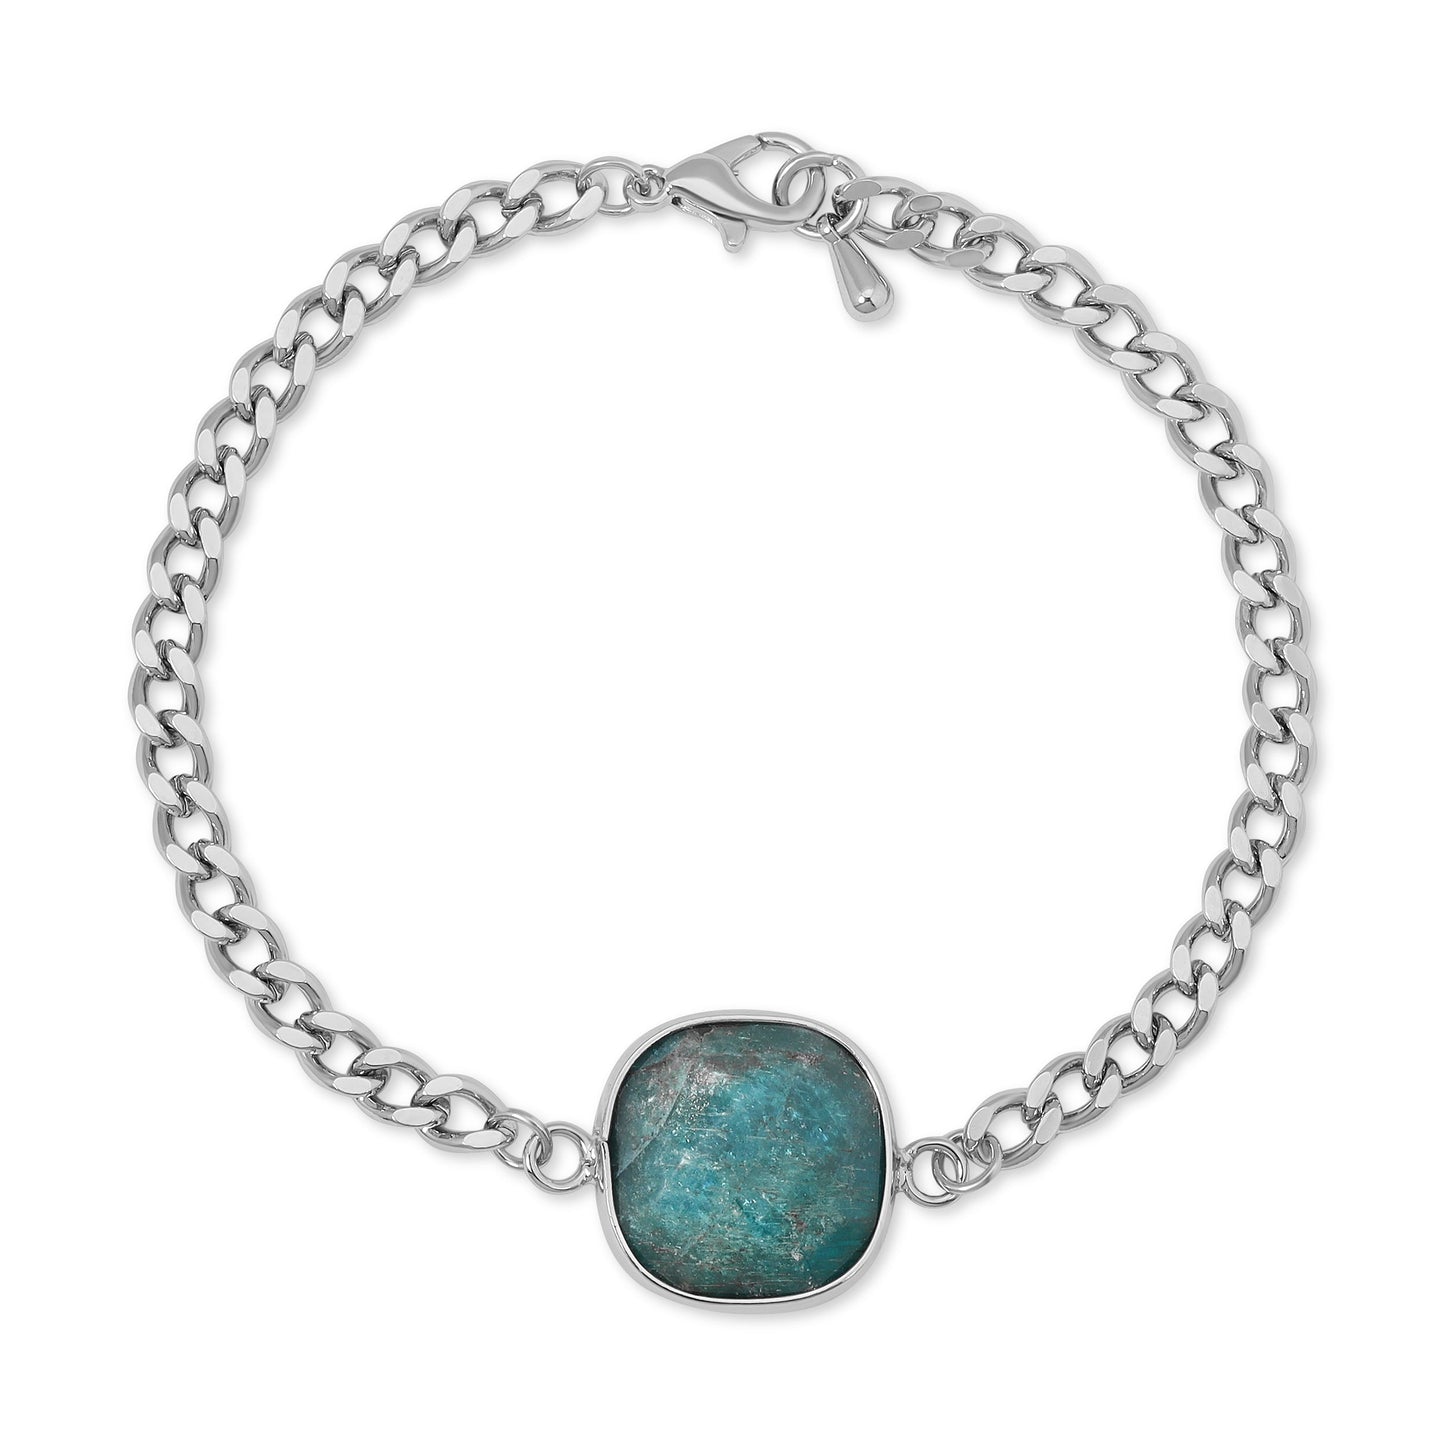 chrysocolla faceted stone with sterling silver plated curb chain bracelet